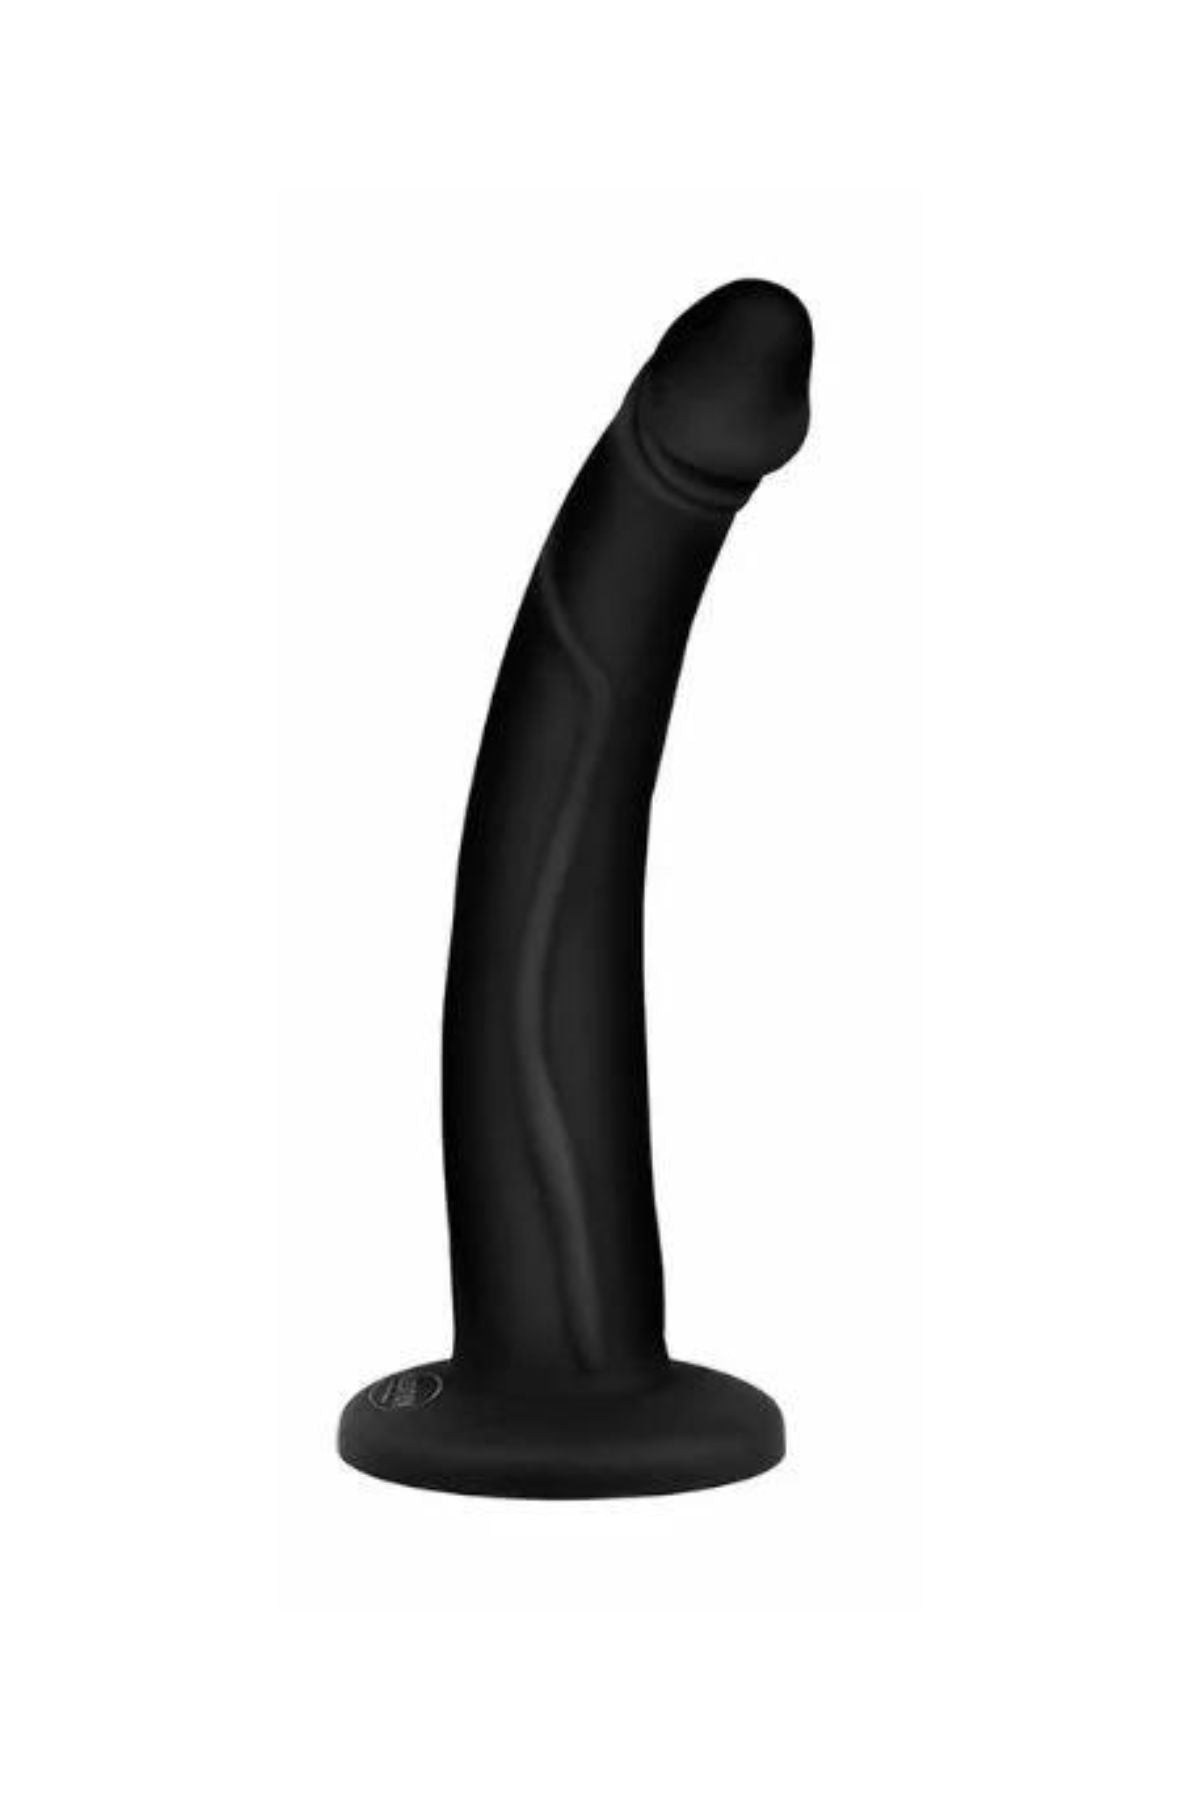 Barry Black | Suction Cup Dildo